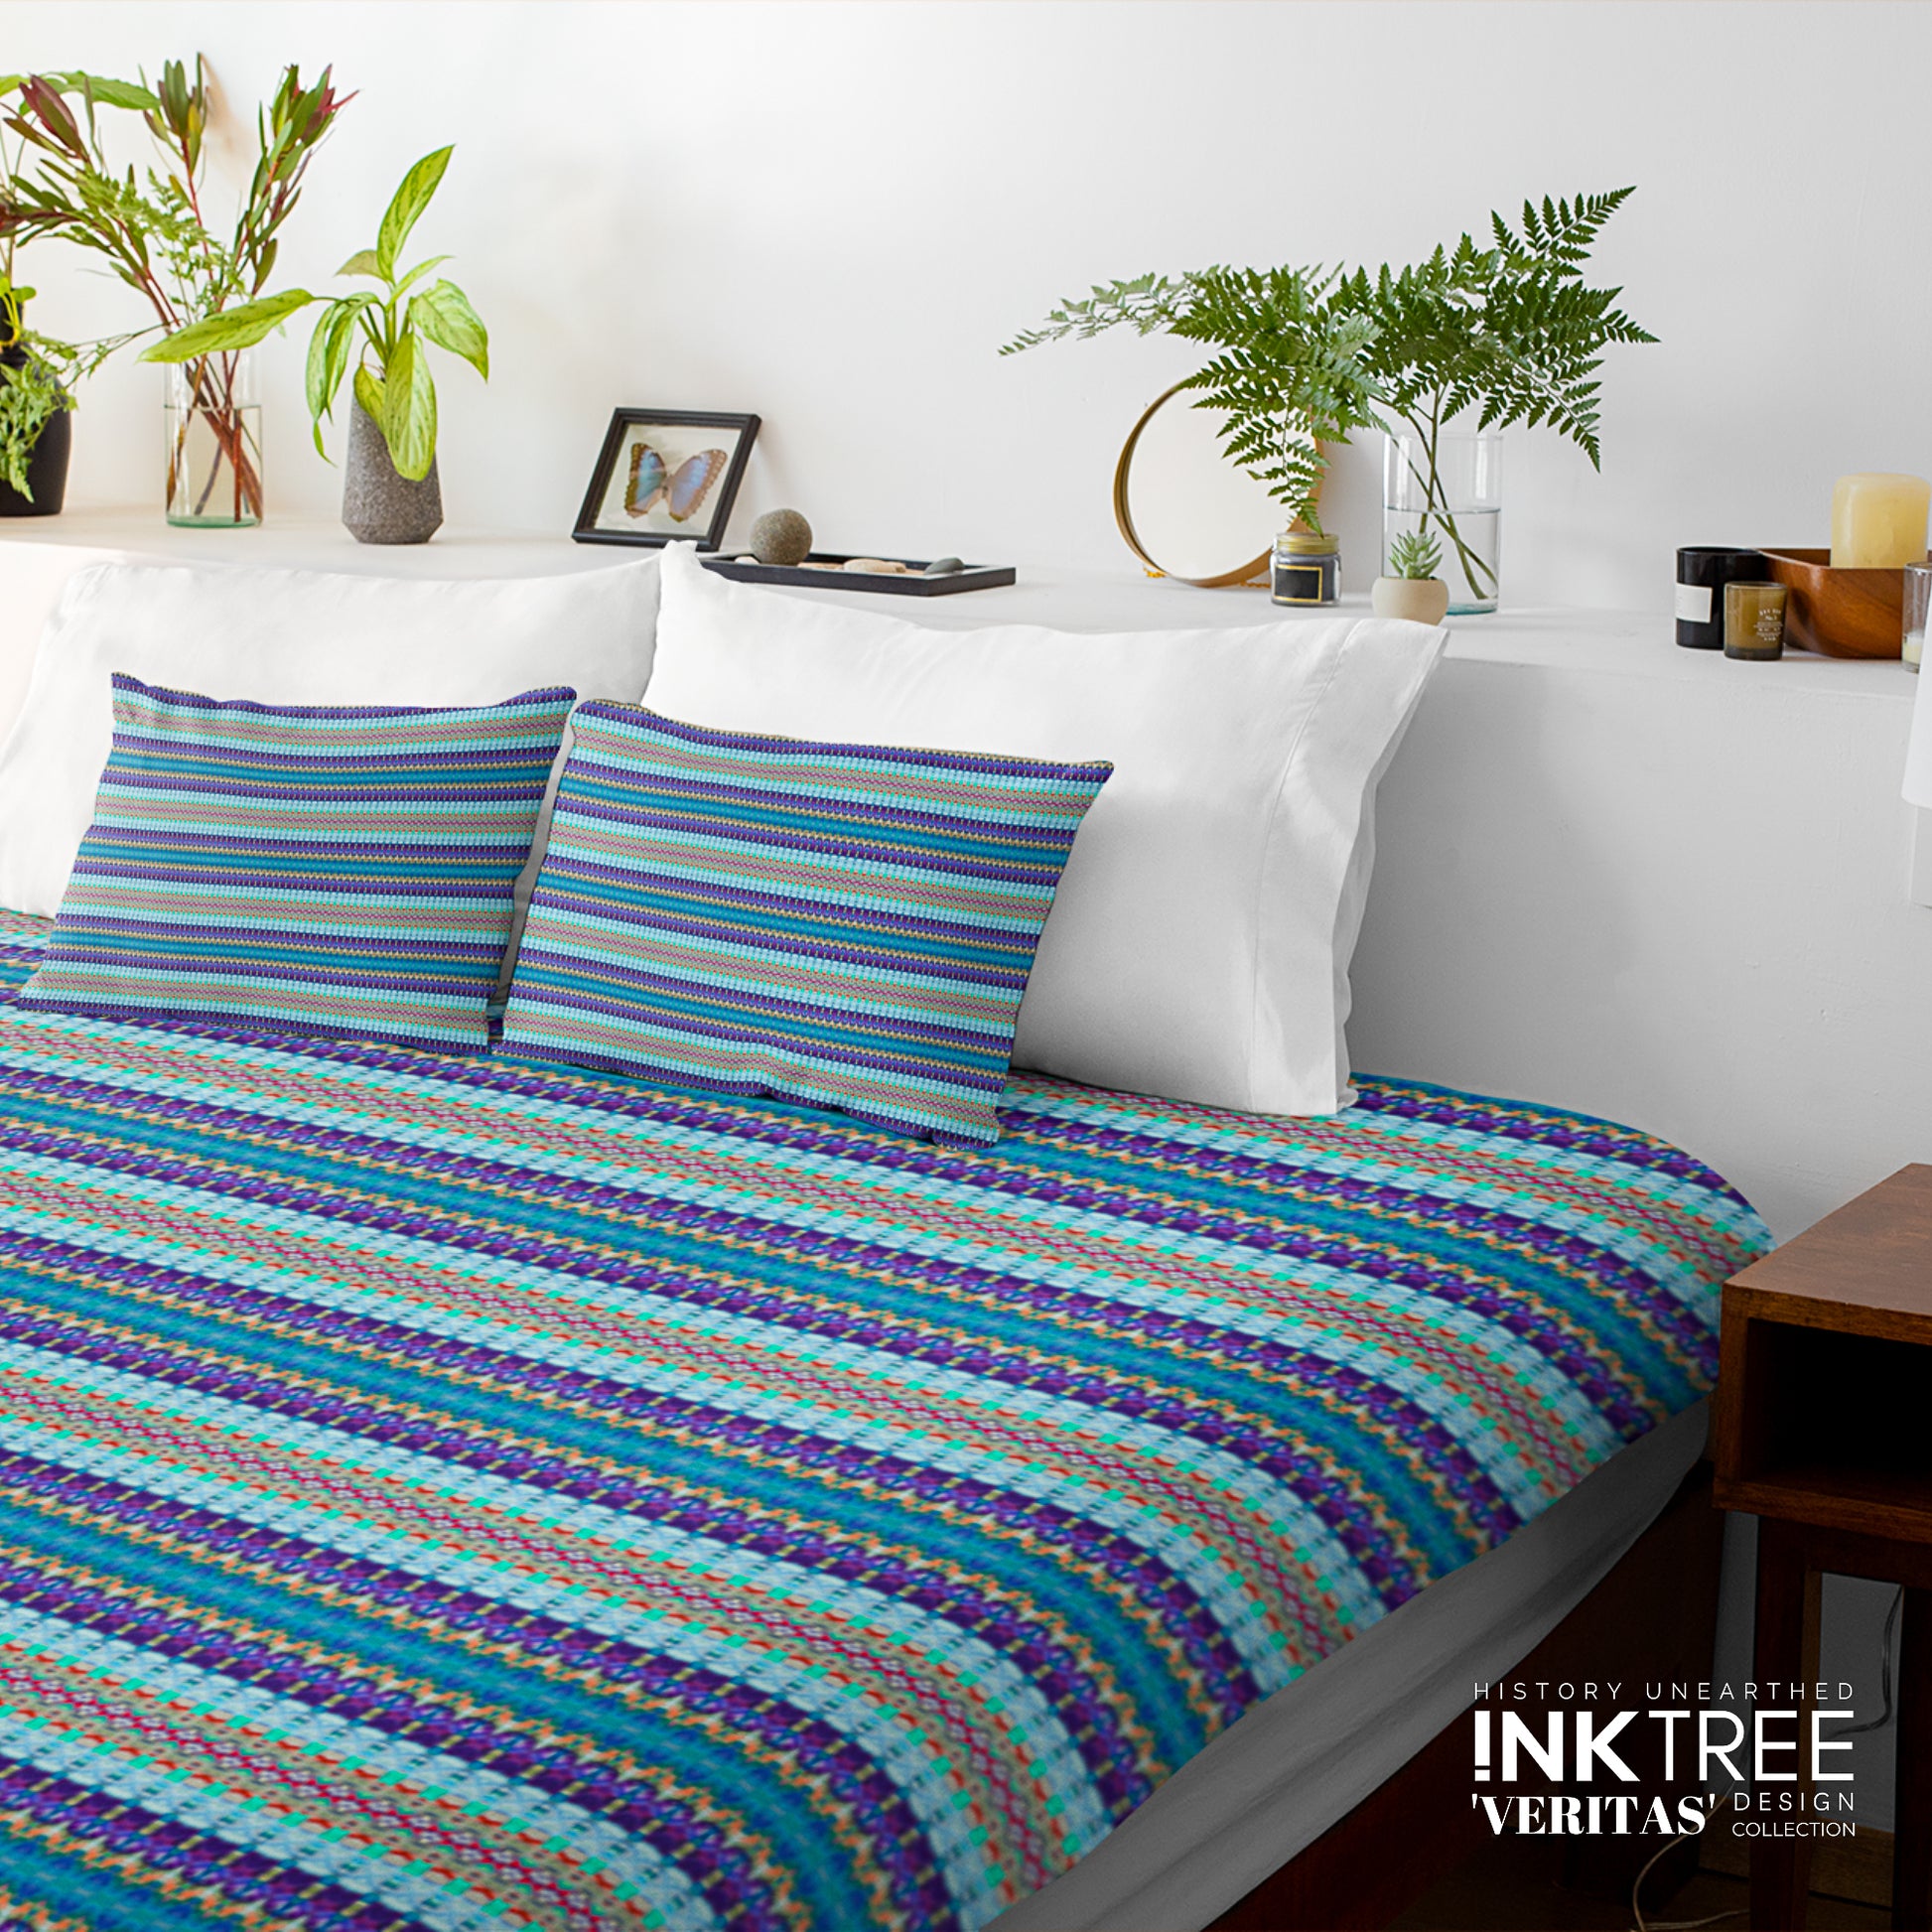 A doona cover and pillows with blue and green horizontal pattern against a white wall, leaning against white pillows and green plants in vases.